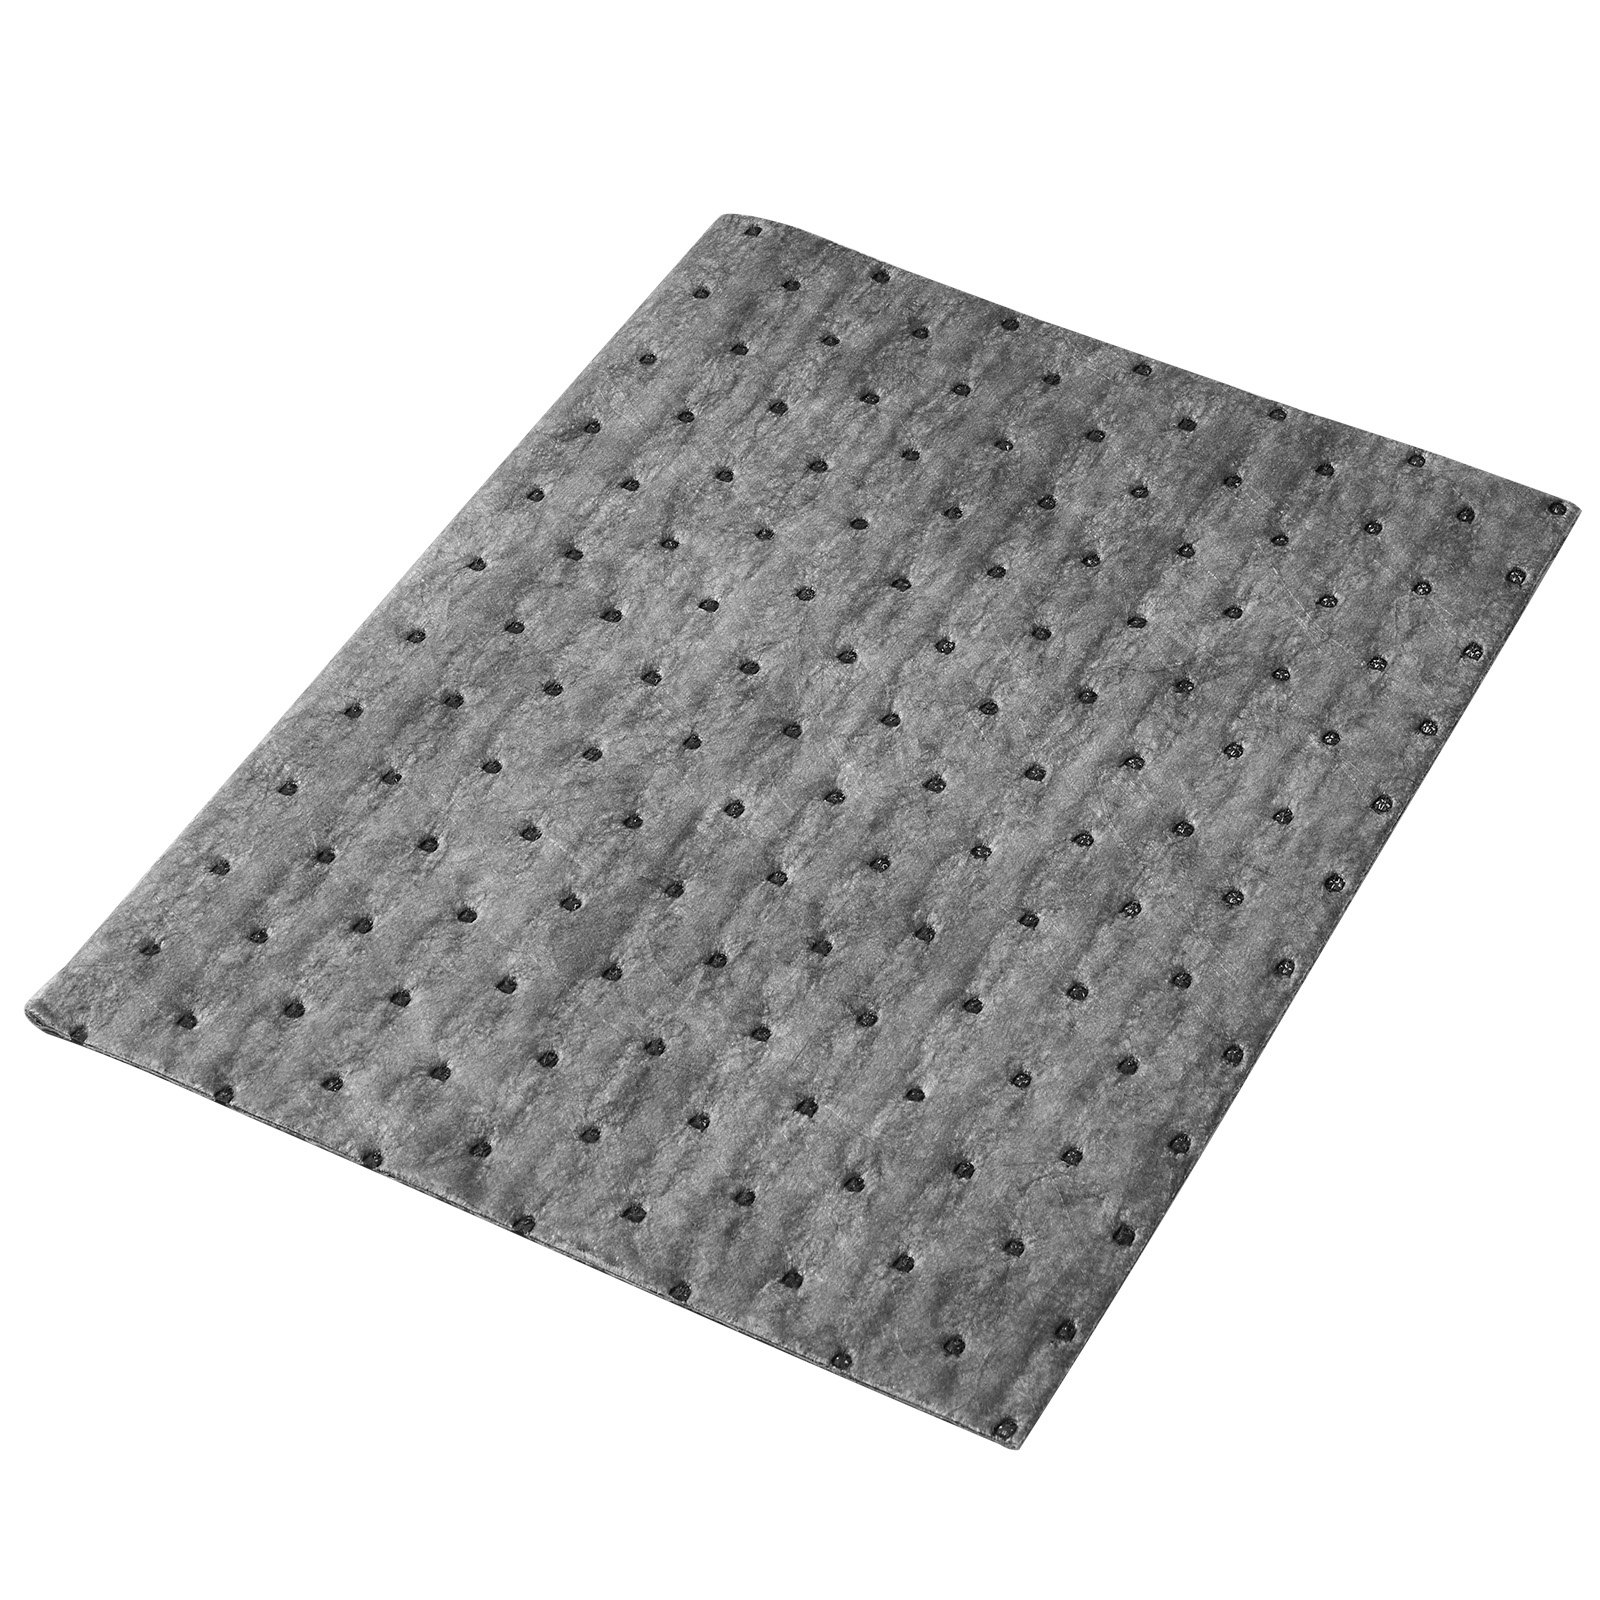 VEVOR Spill Absorbent Pads, Universal Absorbing Mat Absorbs up 12 Gal, 13" L x10" W Polypropylene Absorbent Pad for Oil, Water and Other Liquids, Pack of 100, Goodies N Stuff